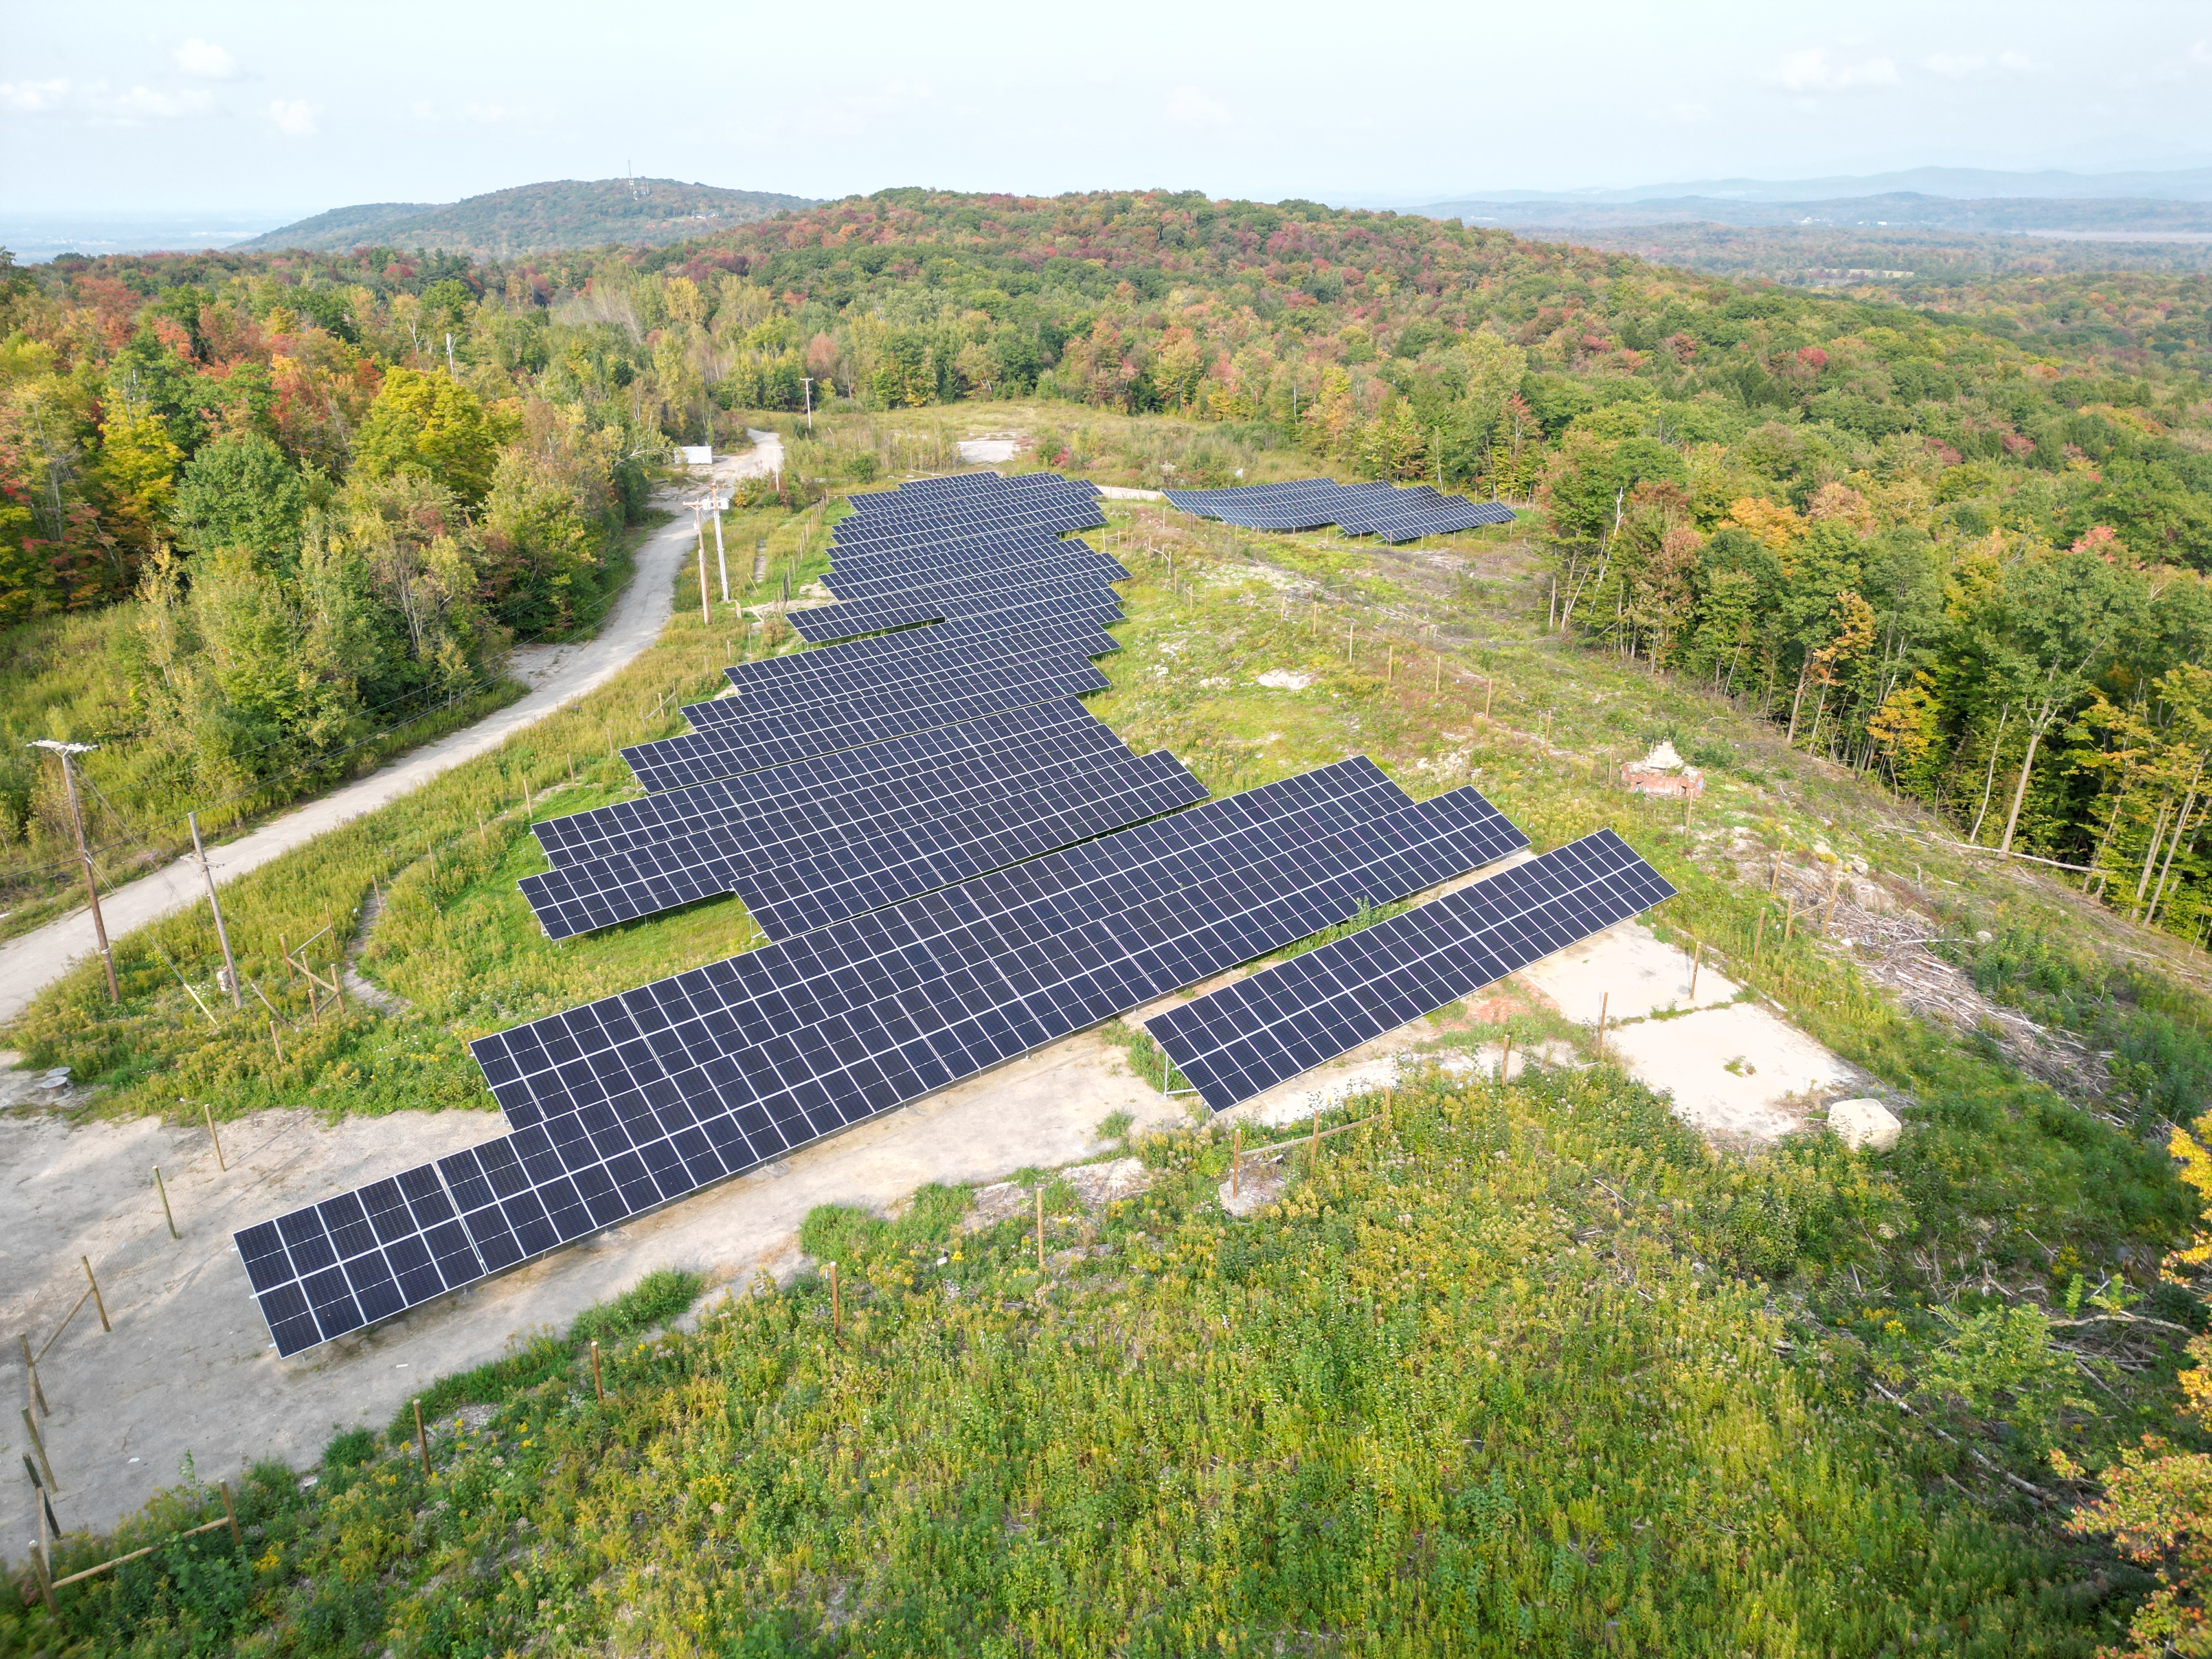 Community Solar Array at Former U.S. Air Force Station in St. Albans, Vt